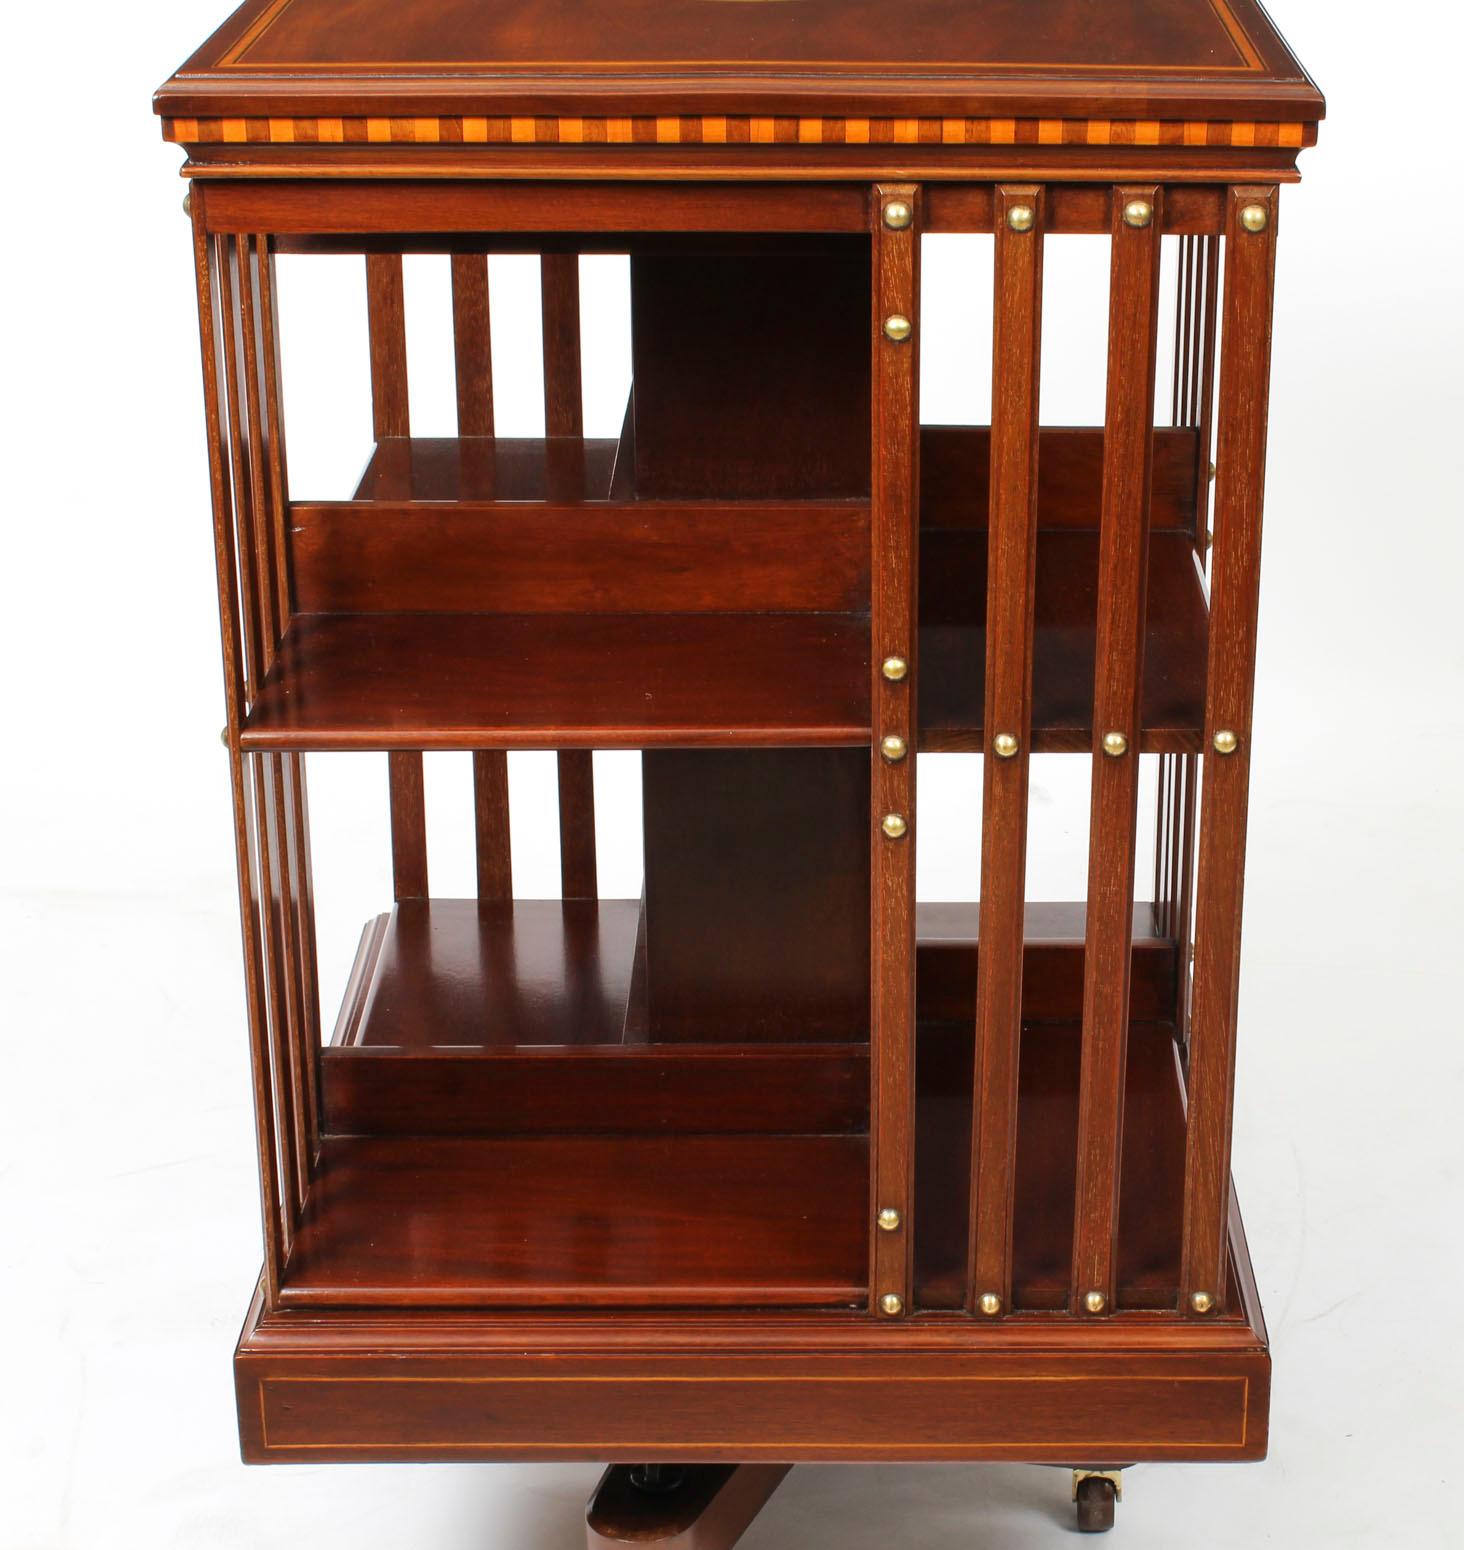 Early 20th Century Edwardian Revolving Bookcase by Maple & Co 2